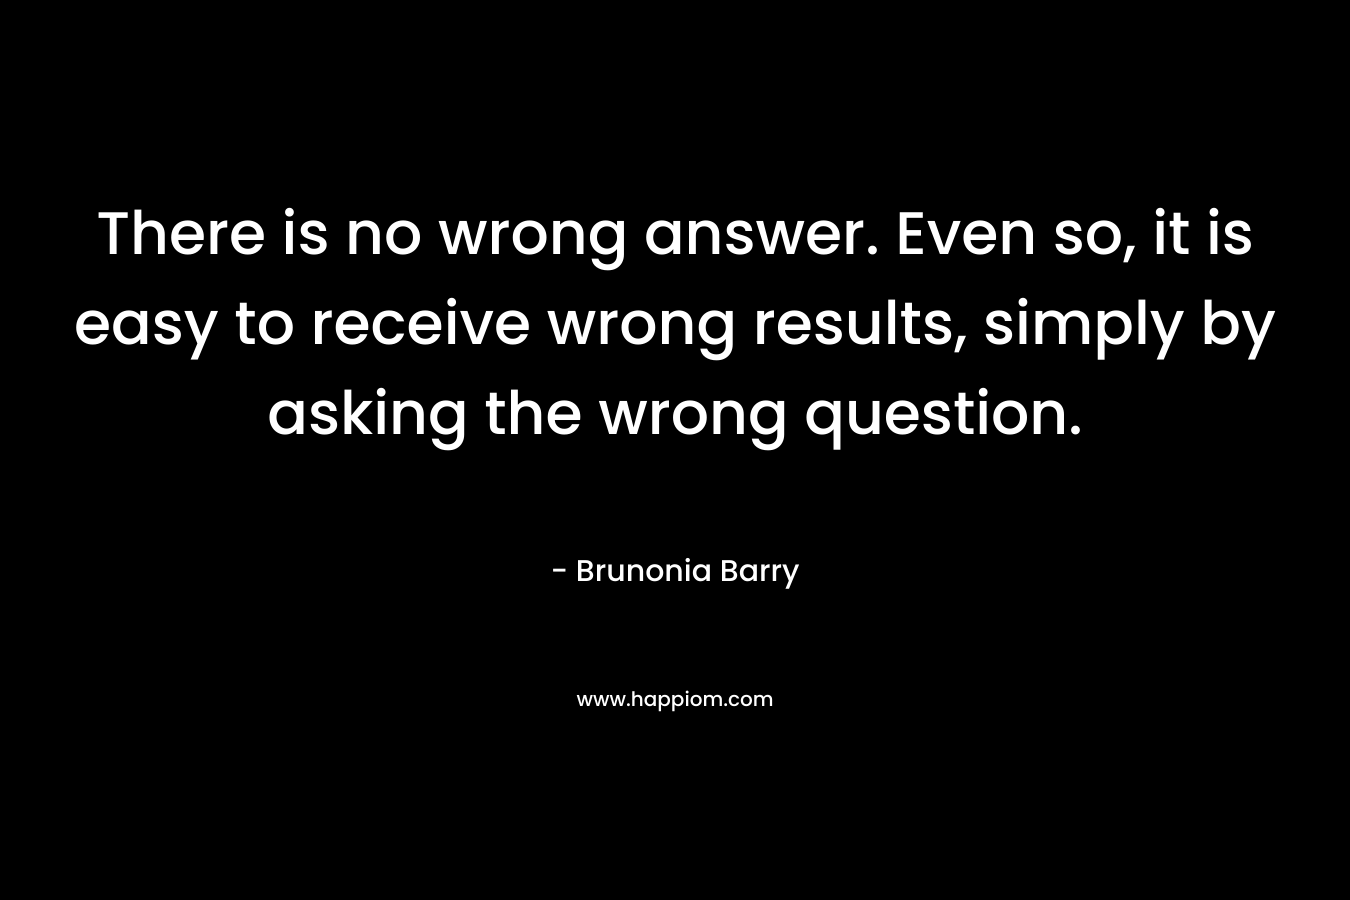 There is no wrong answer. Even so, it is easy to receive wrong results, simply by asking the wrong question. – Brunonia Barry